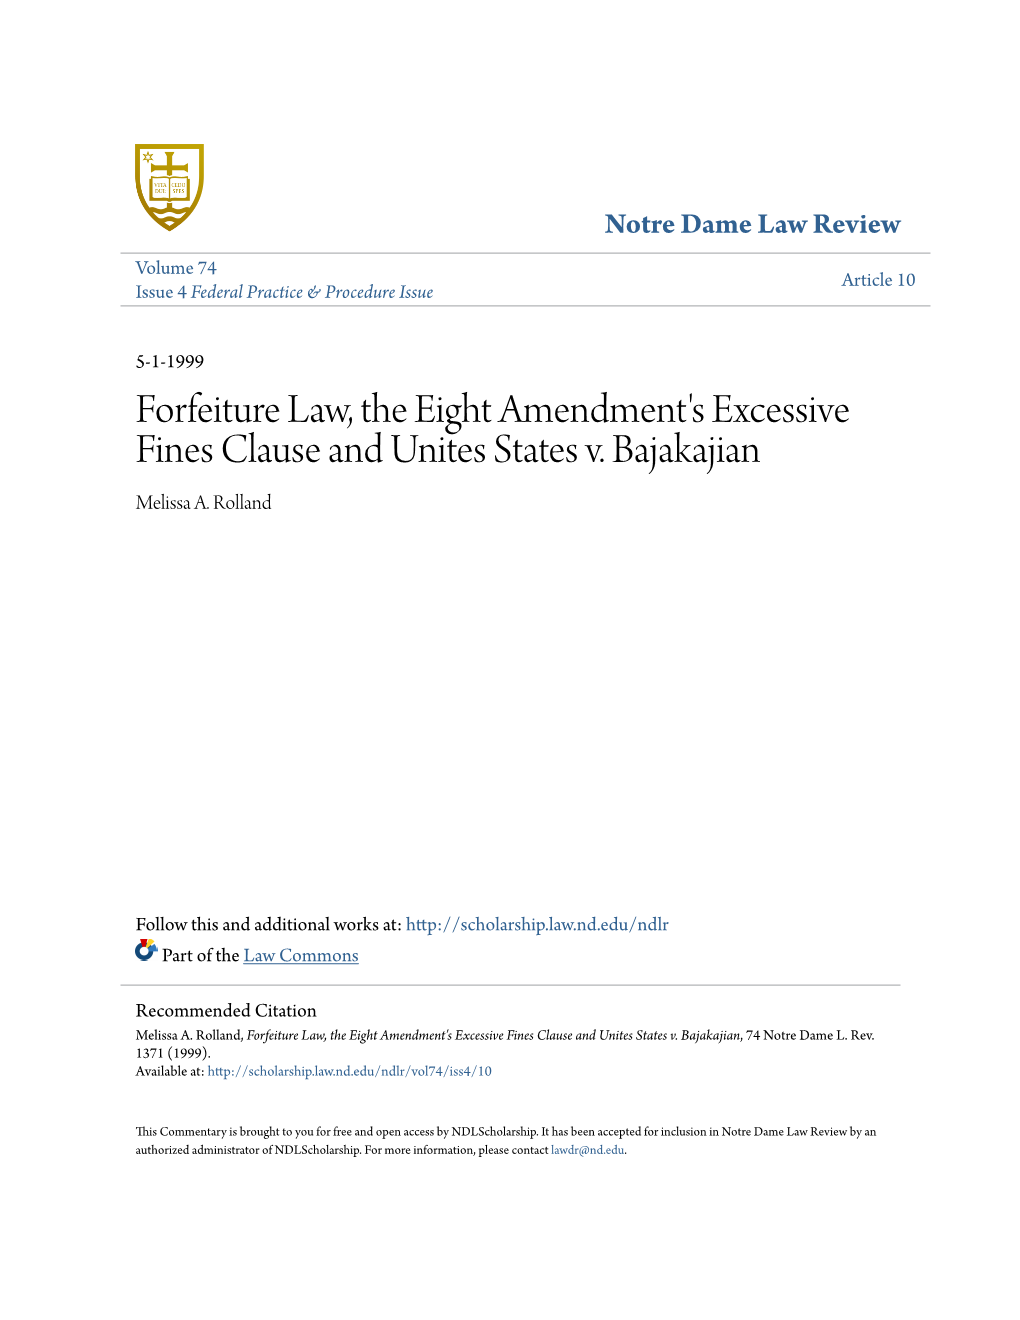 Forfeiture Law, the Eight Amendment's Excessive Fines Clause and Unites States V